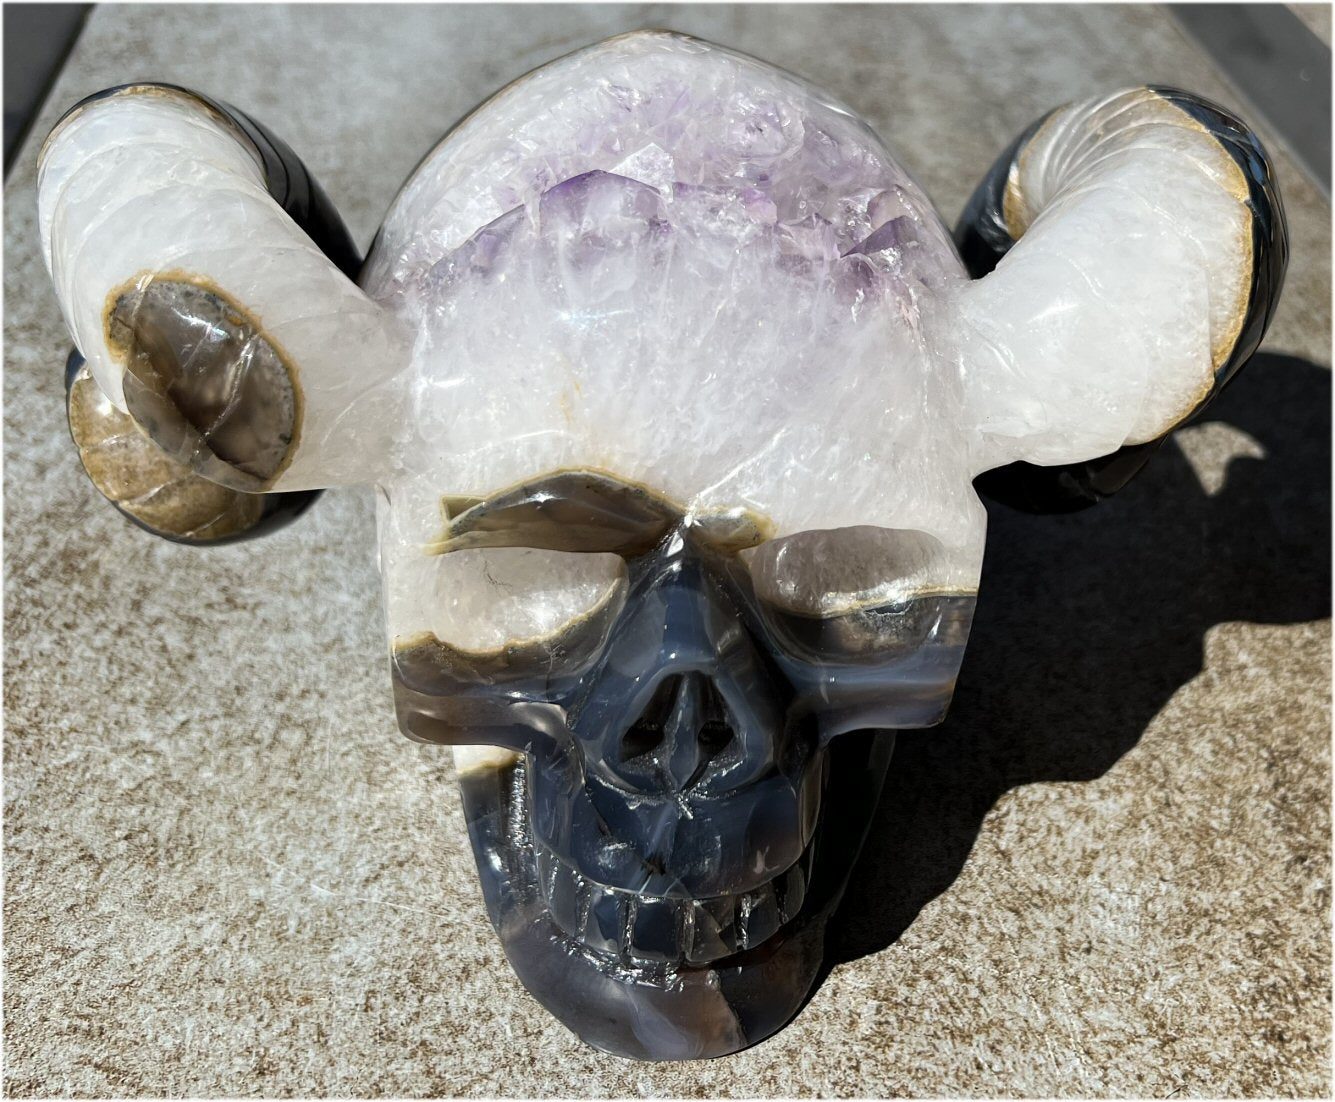 Amethyst Geode RAM Skull with Dendritic inclusions, Shimmery rainbows - Aries!